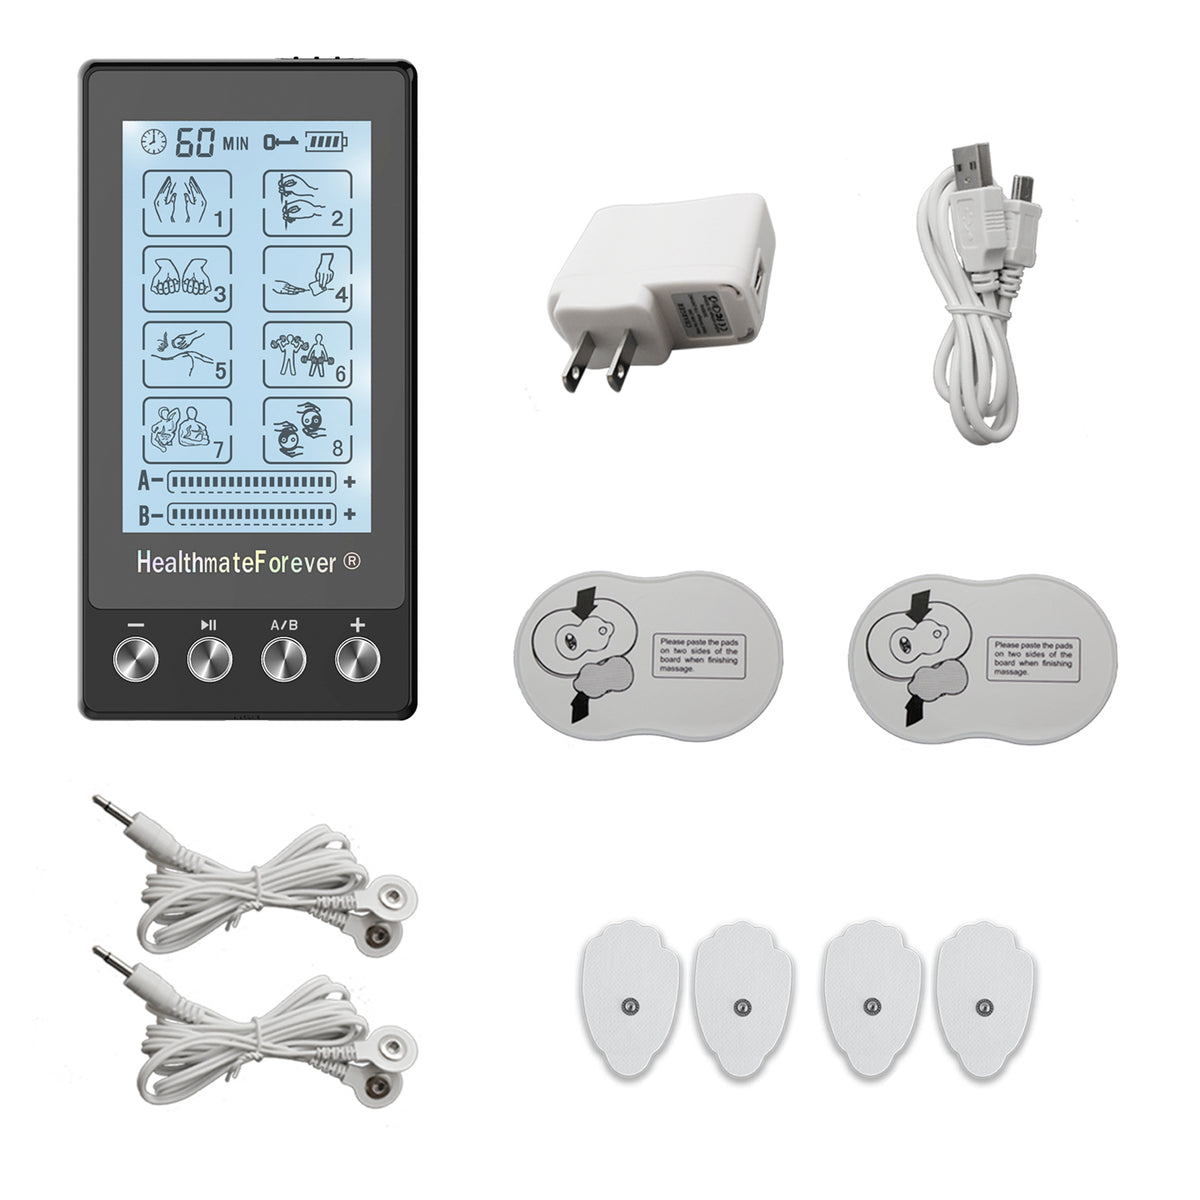 HealthmateForever TS6ABH Touch Screen Tens Unit & Muscle Stimulator (Black)